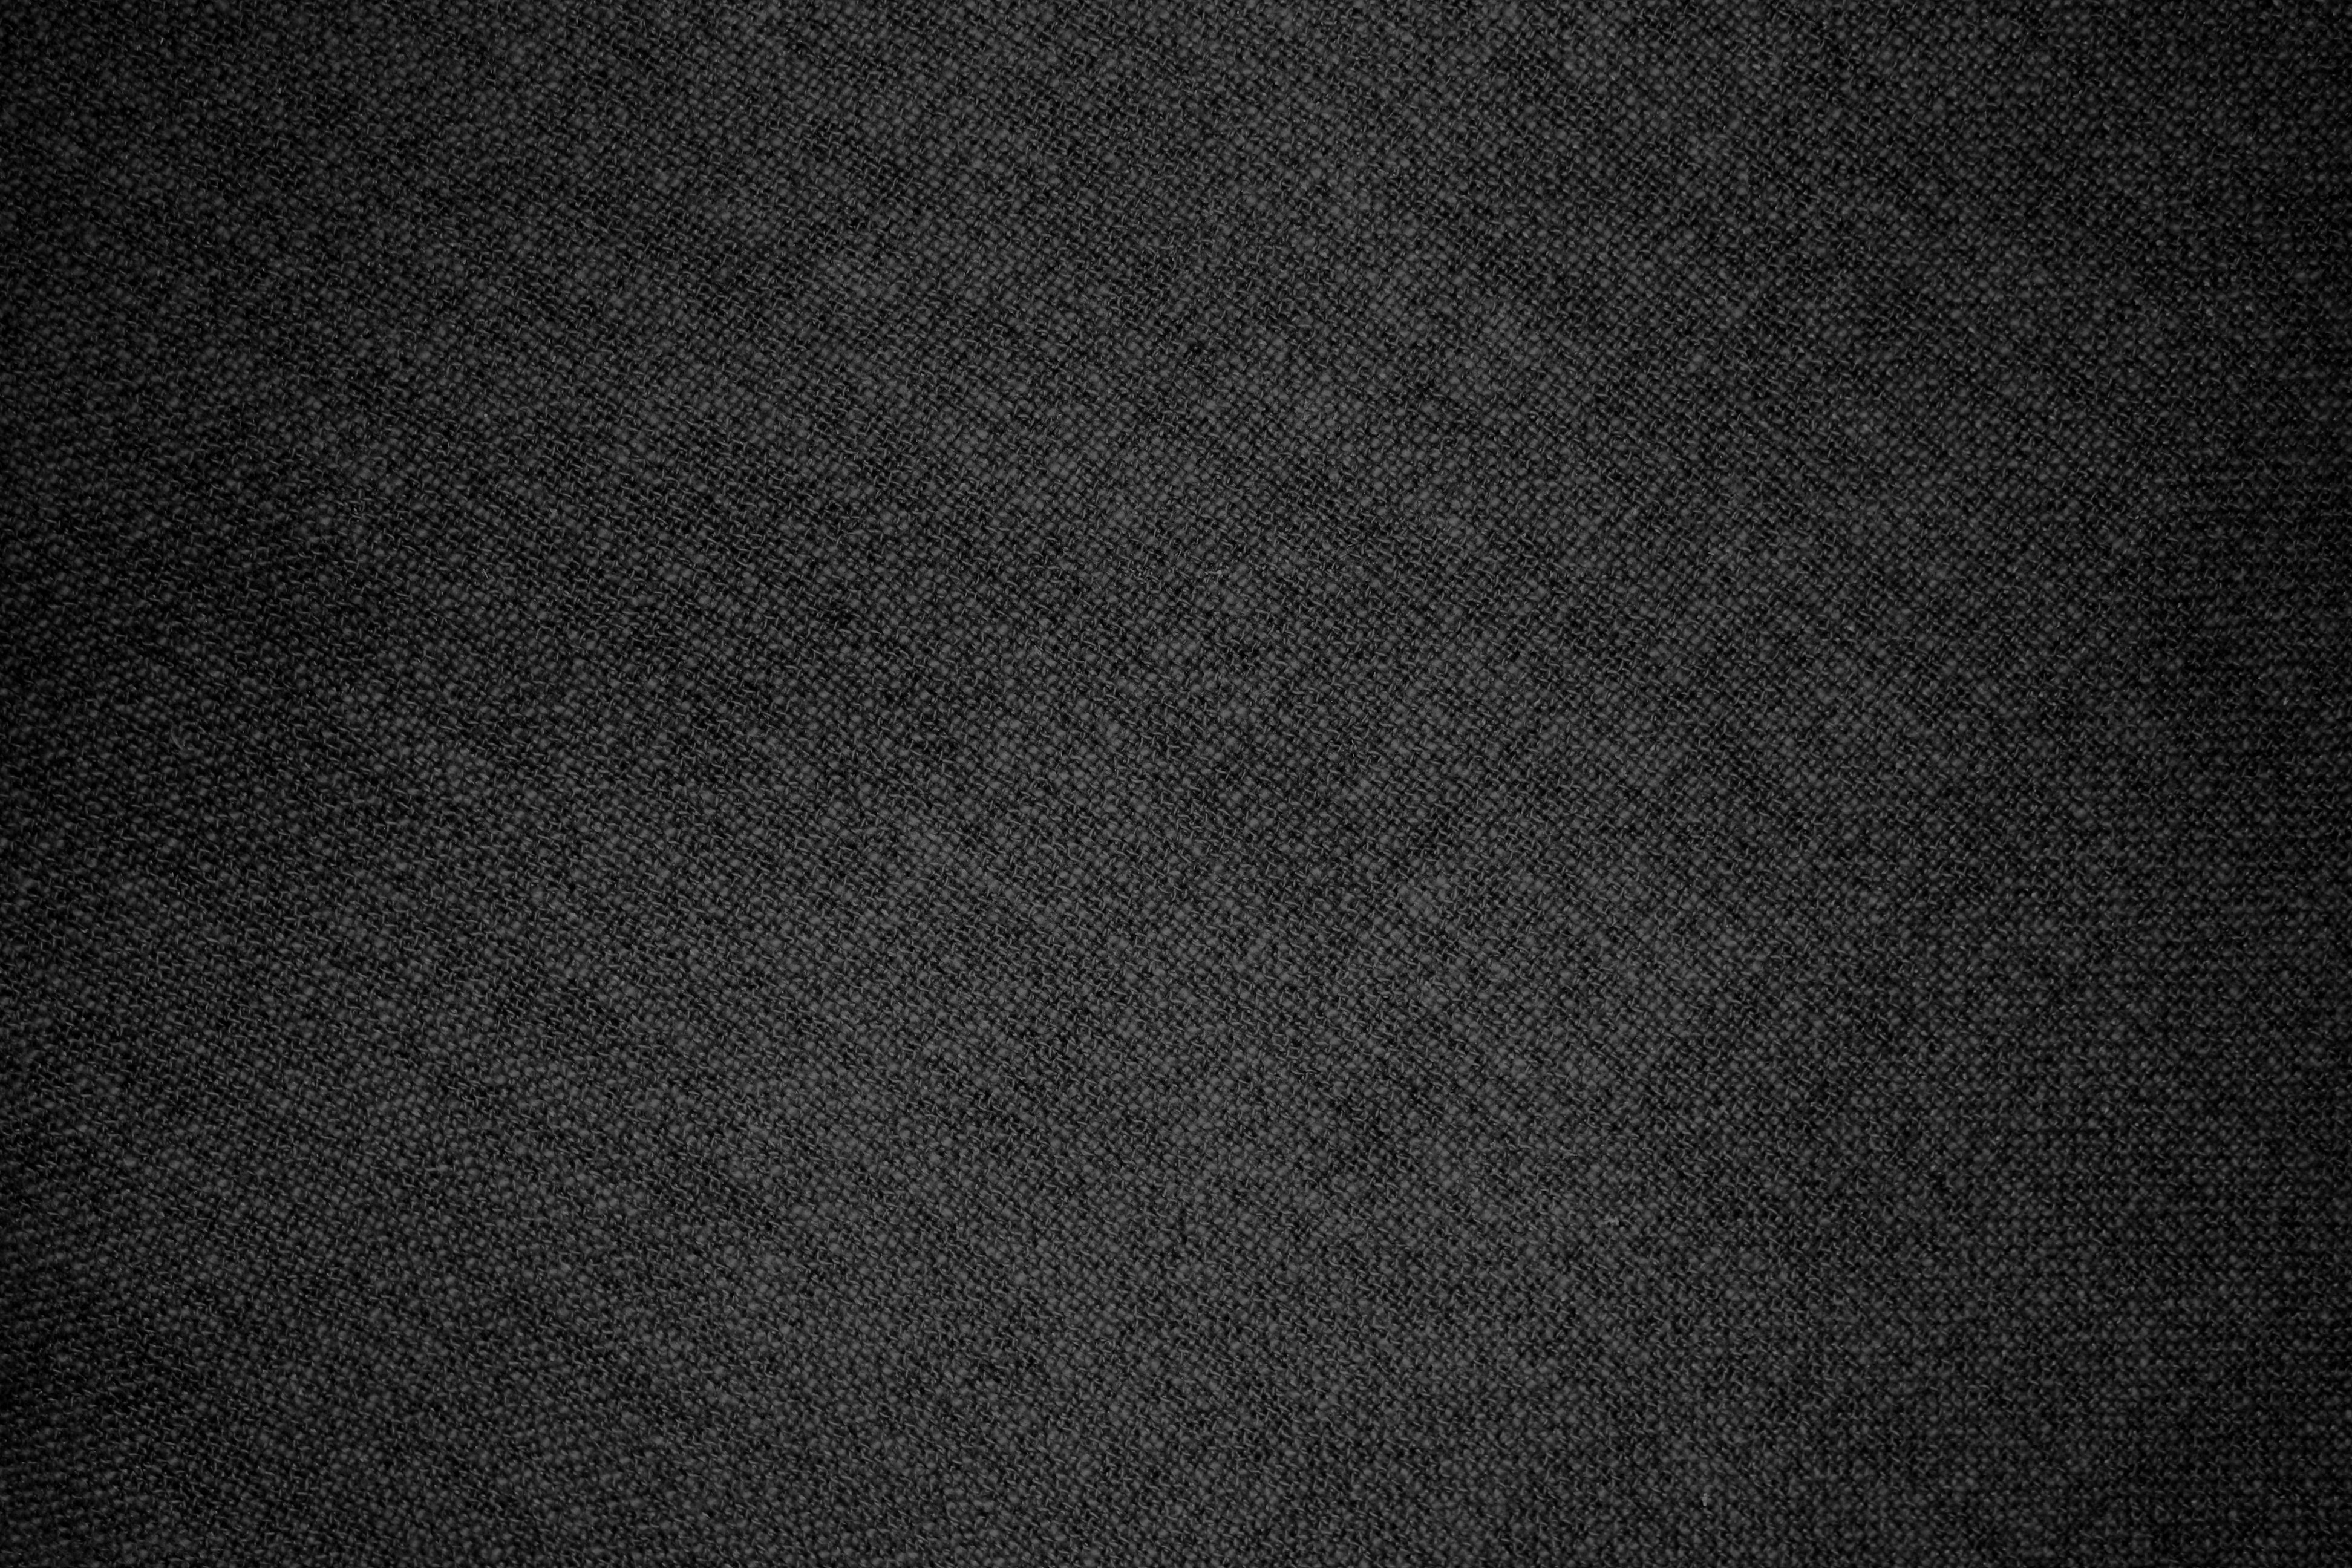 Black Fabric Texture High Resolution Photo Dimensions